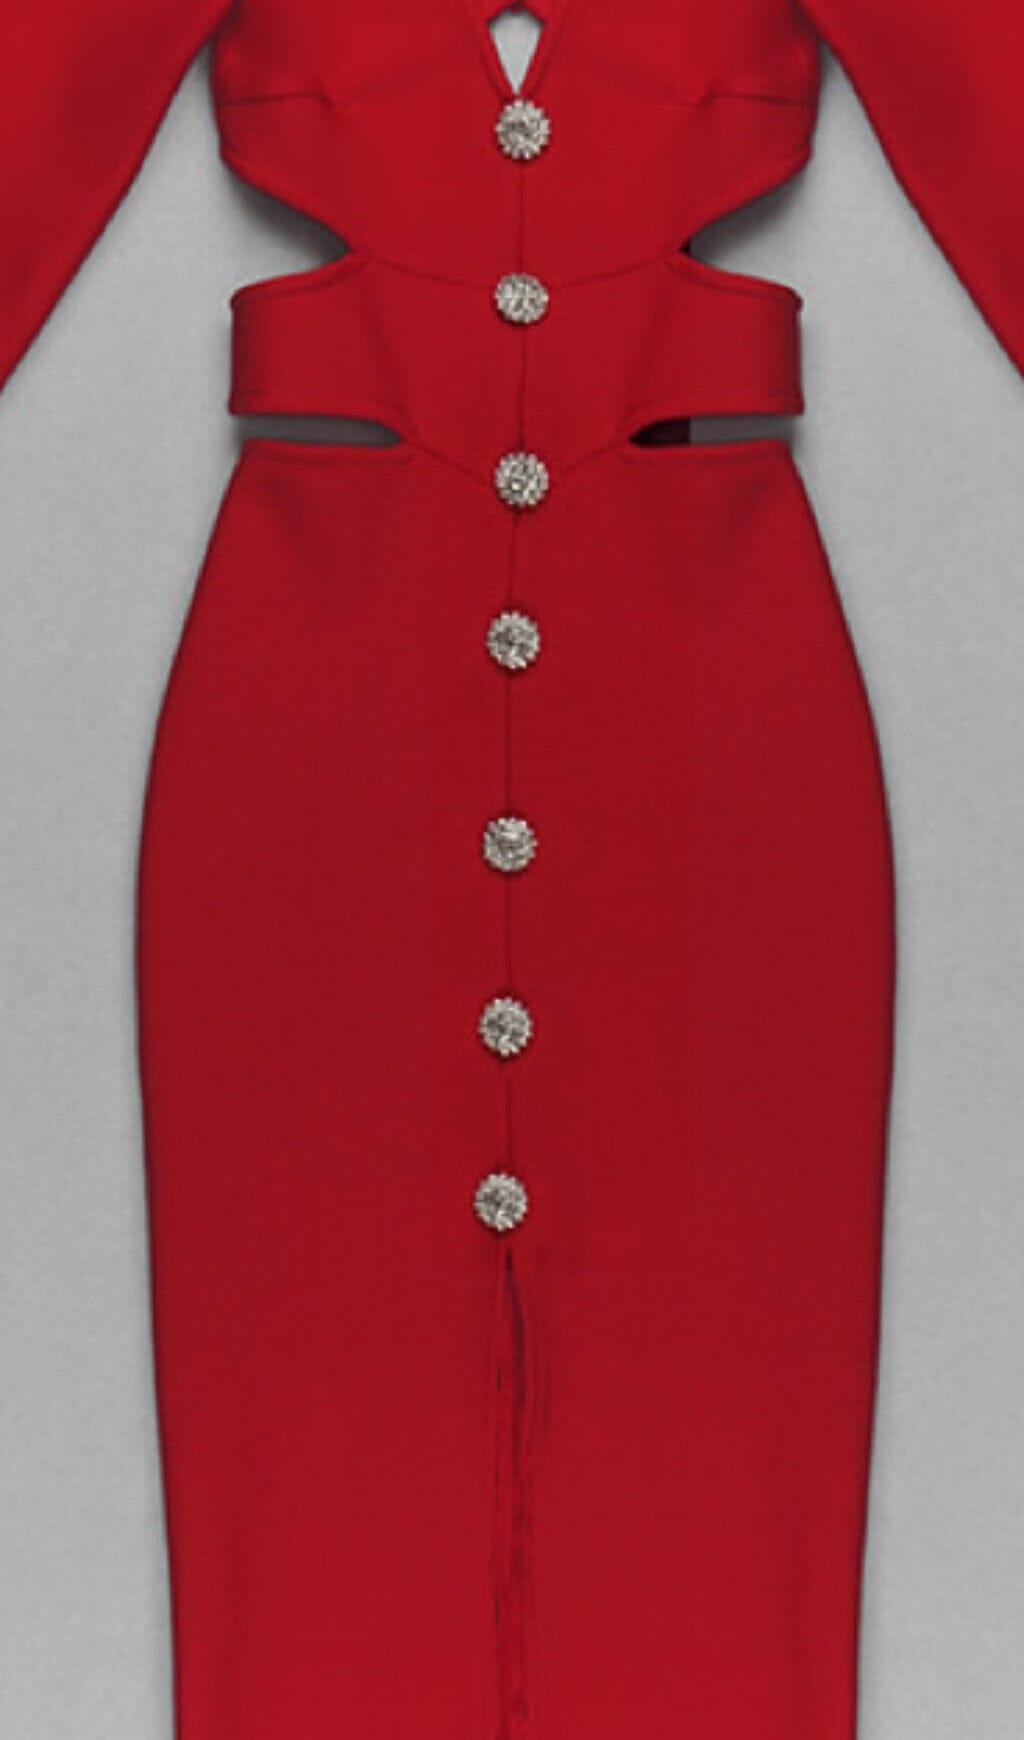 HOLLOW SLIM-FIT DRESS IN RED